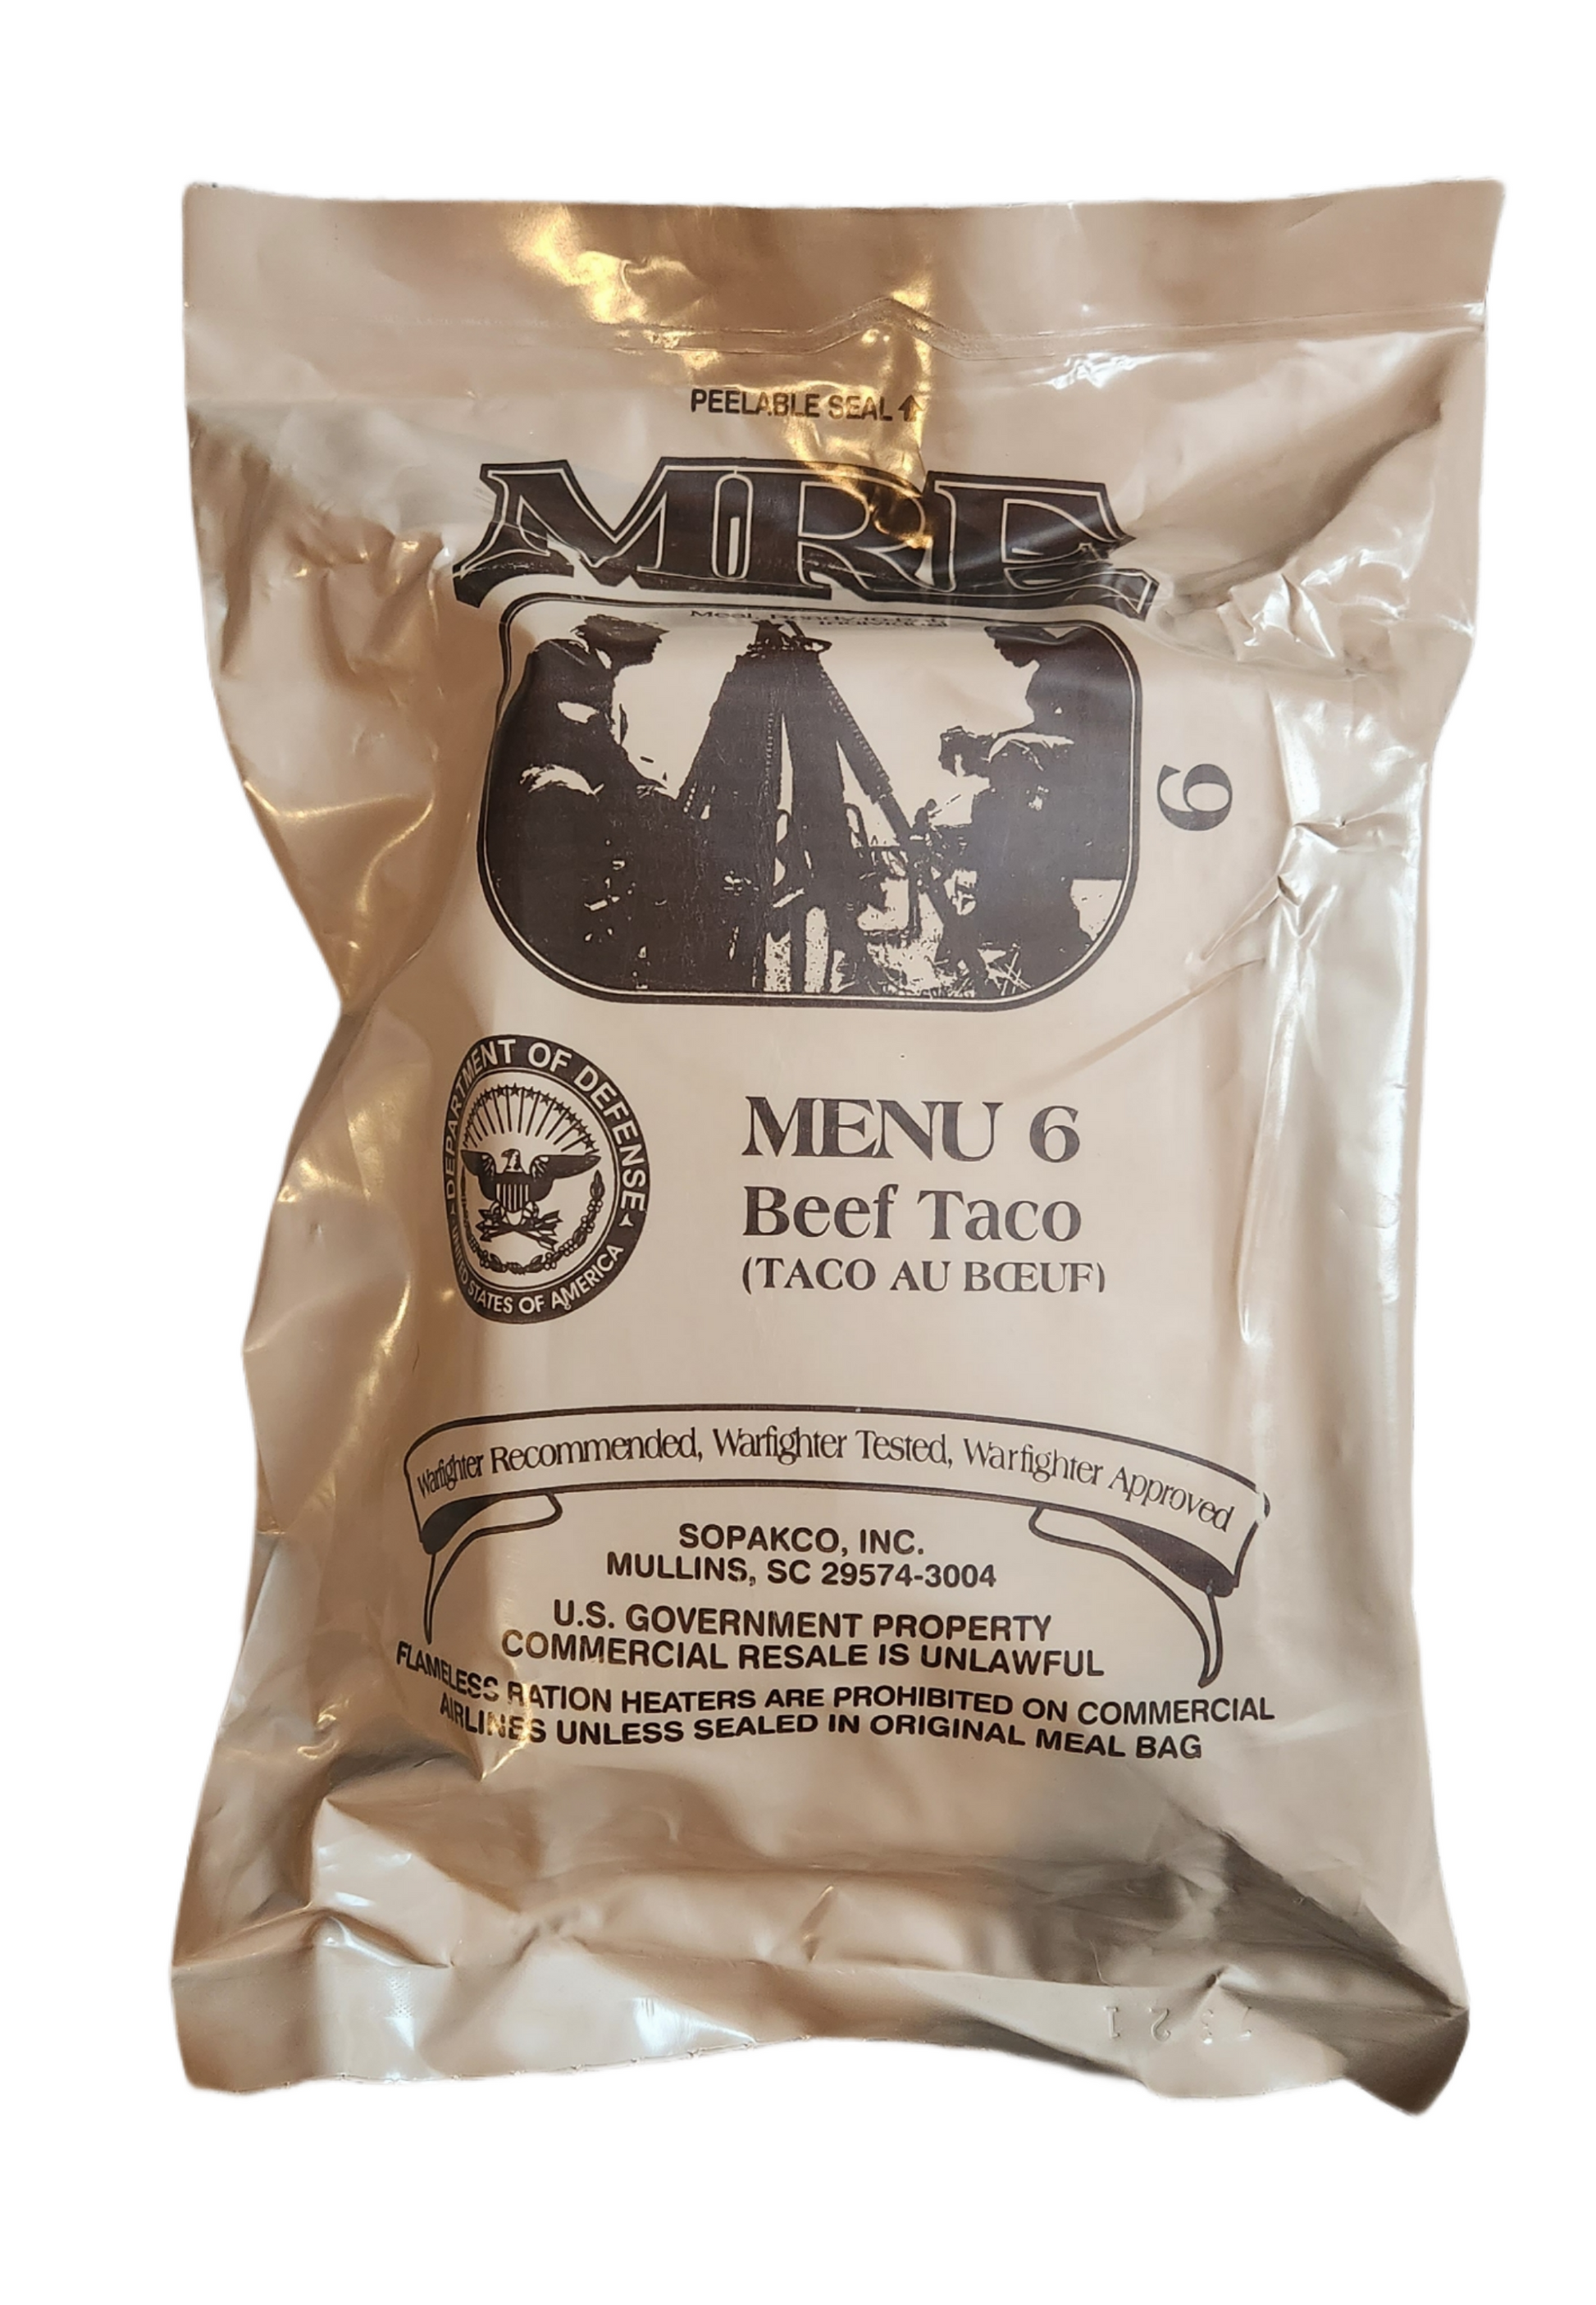 MRE (Meals ready to eat) single meal – NW Surplus Supply